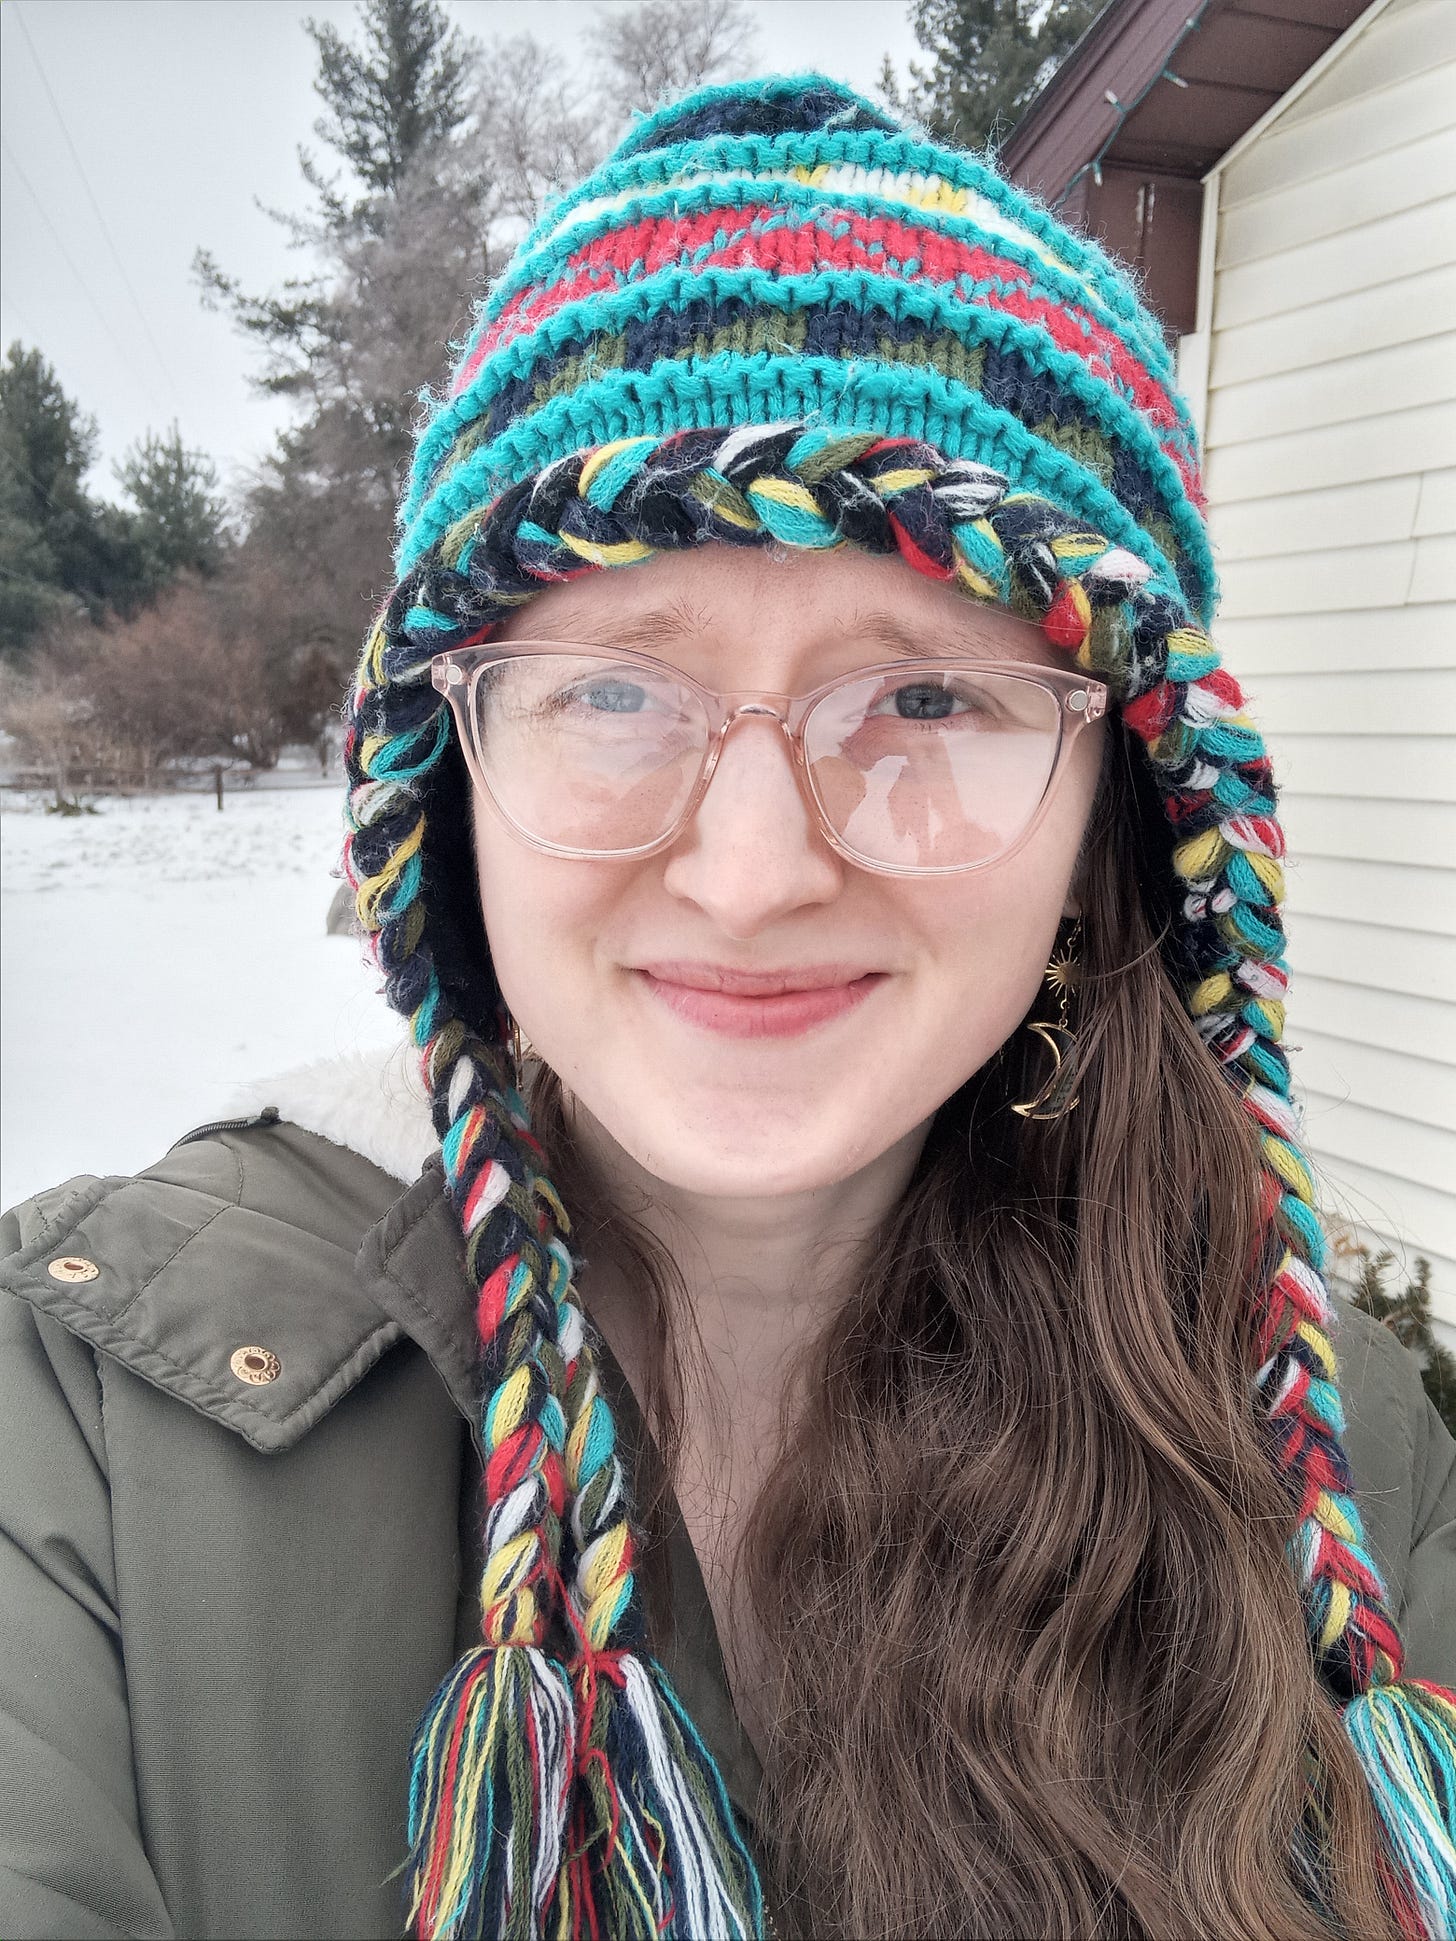 Selfie of Kandi Zeller (She/Her), a white woman with long reddish brown hair and pink glasses, wearing a green winter coat and a colorful winter hat made of acrylic yarn, against a backdrop of snow and evergreen trees